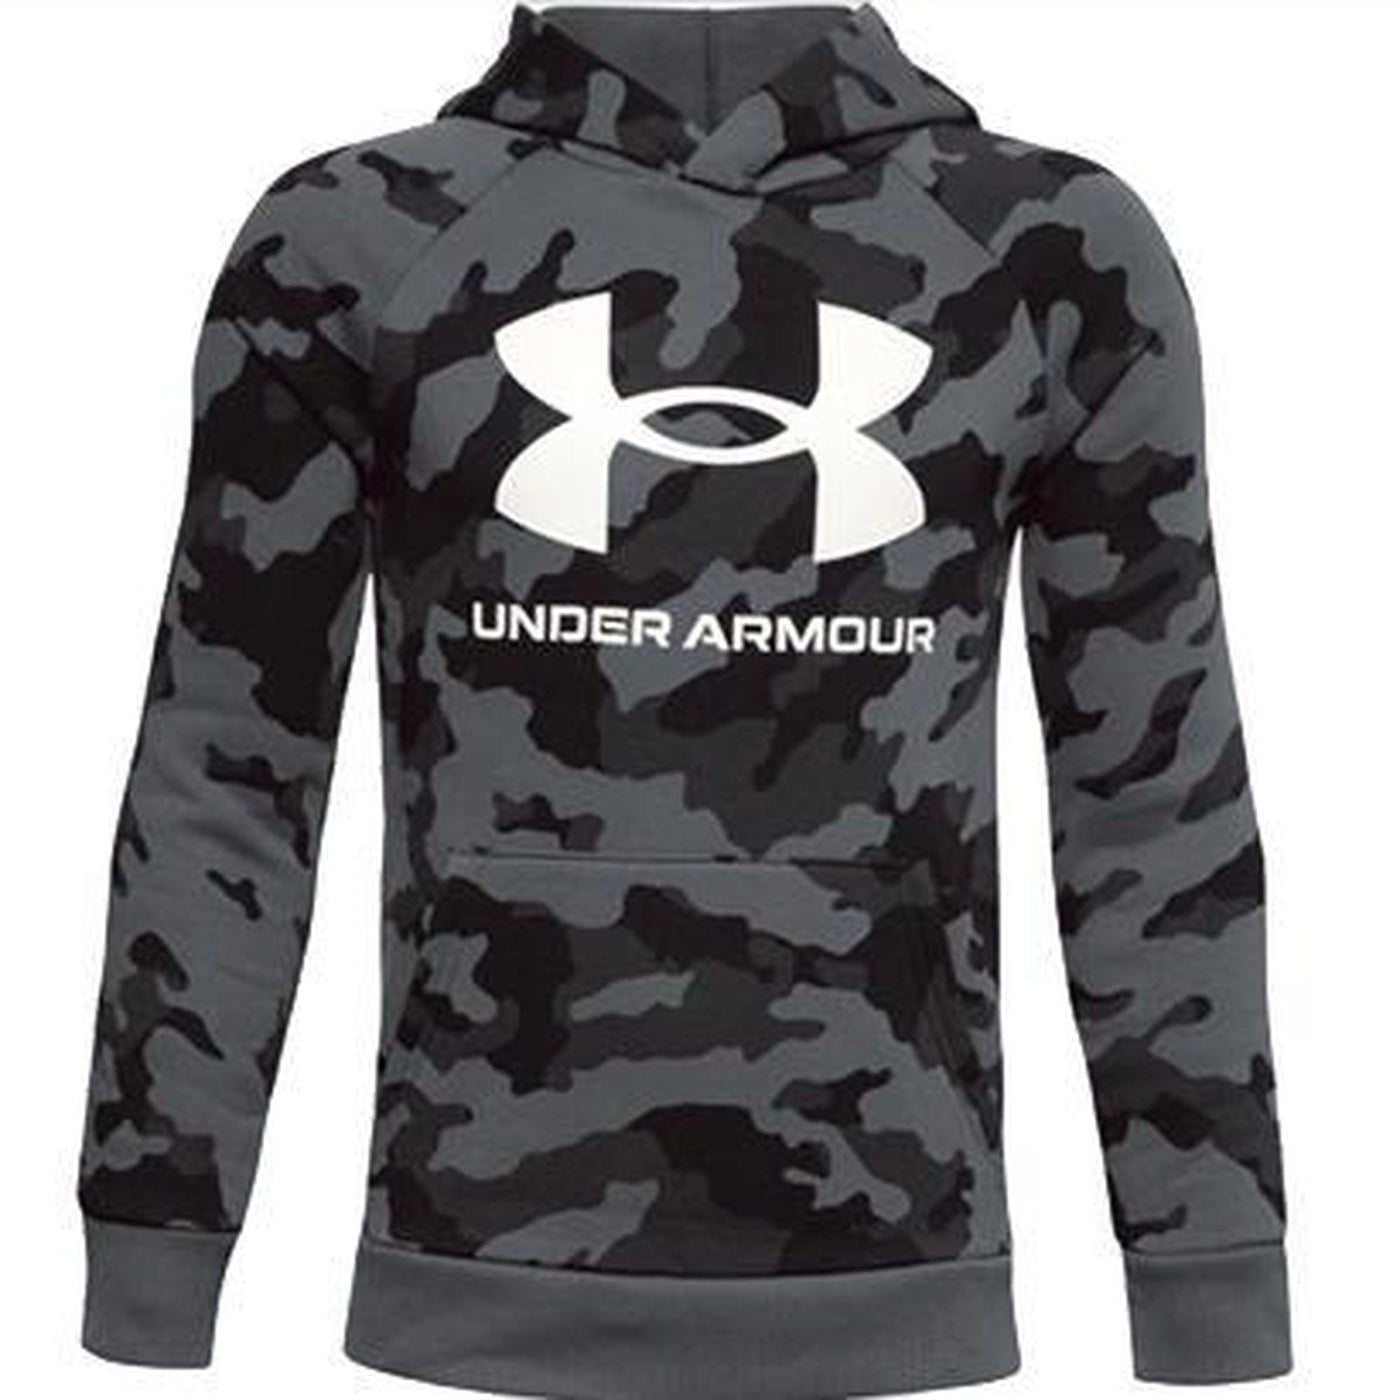 Under Armour Youth Under Armour Rival Fleece Printed Hoodie Black / Large Clothing